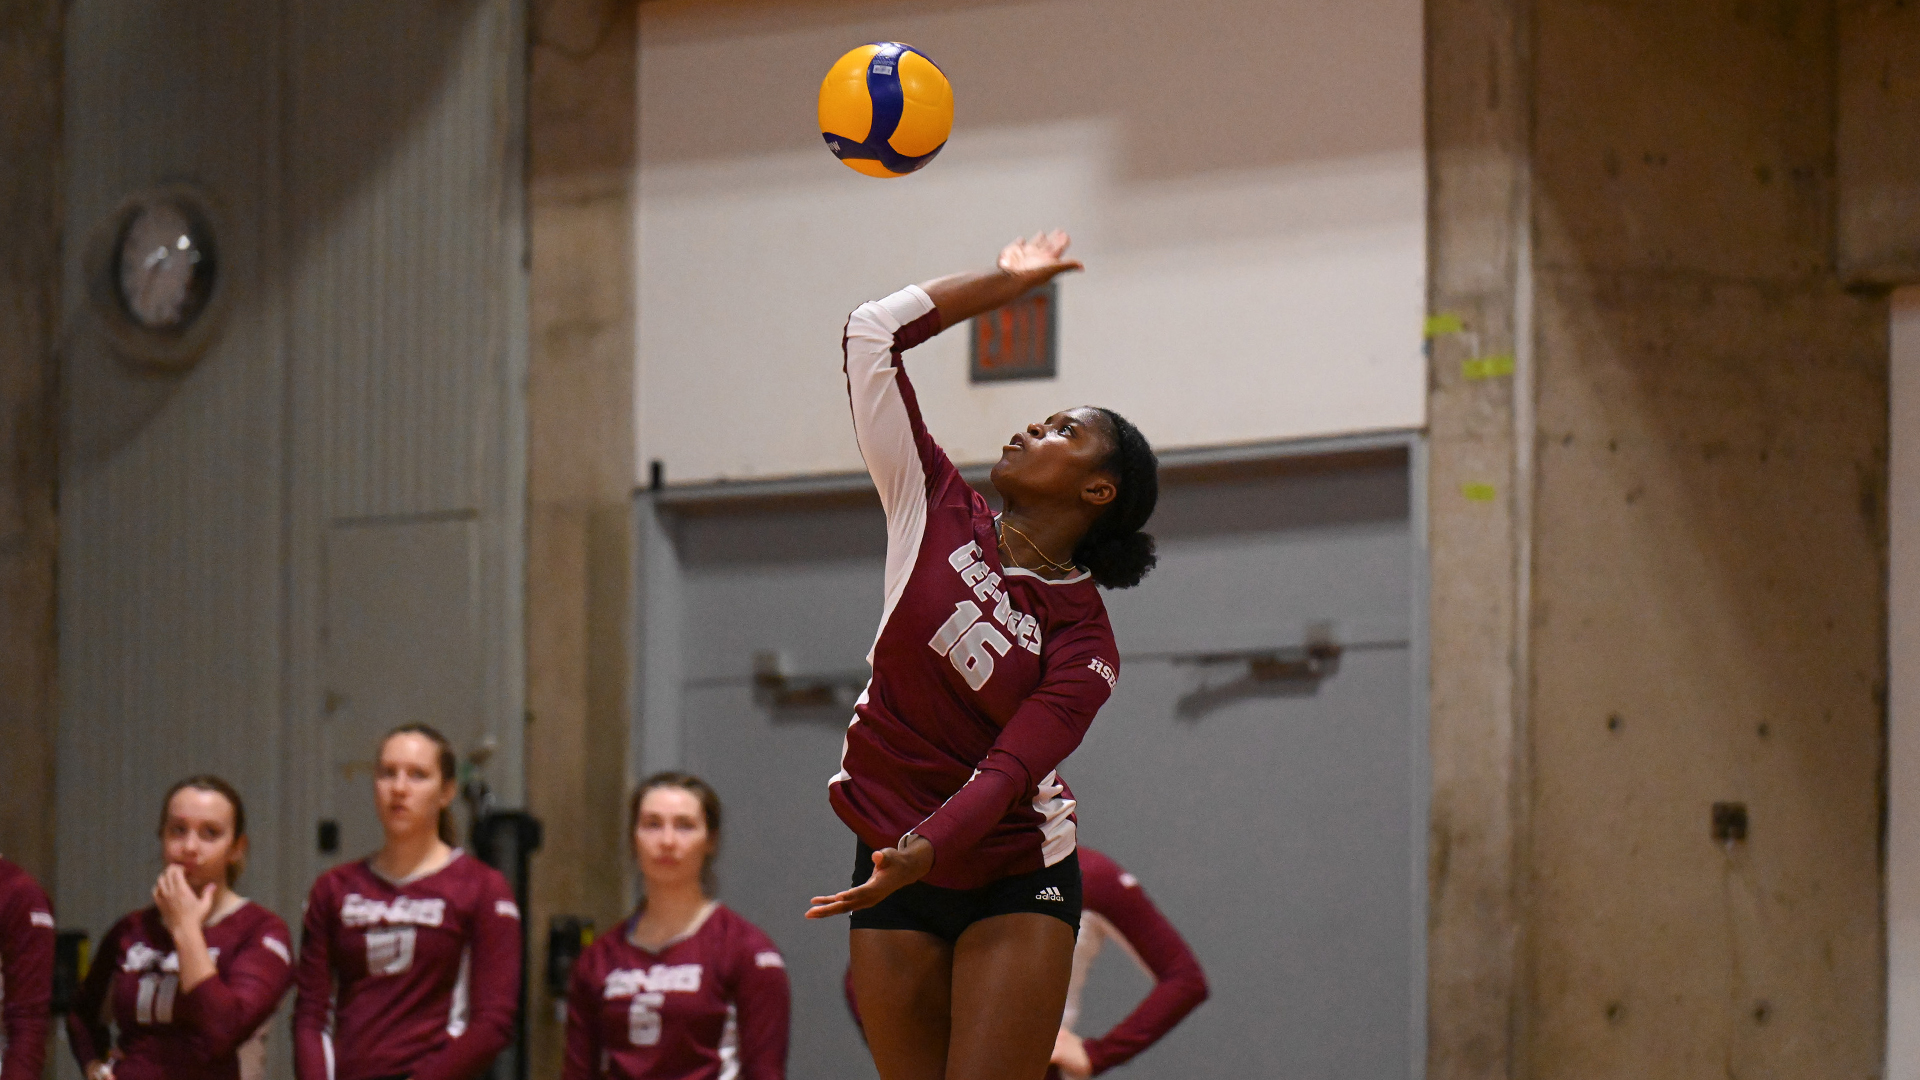 RECAP: Gee-Gees fall to Carabins at home